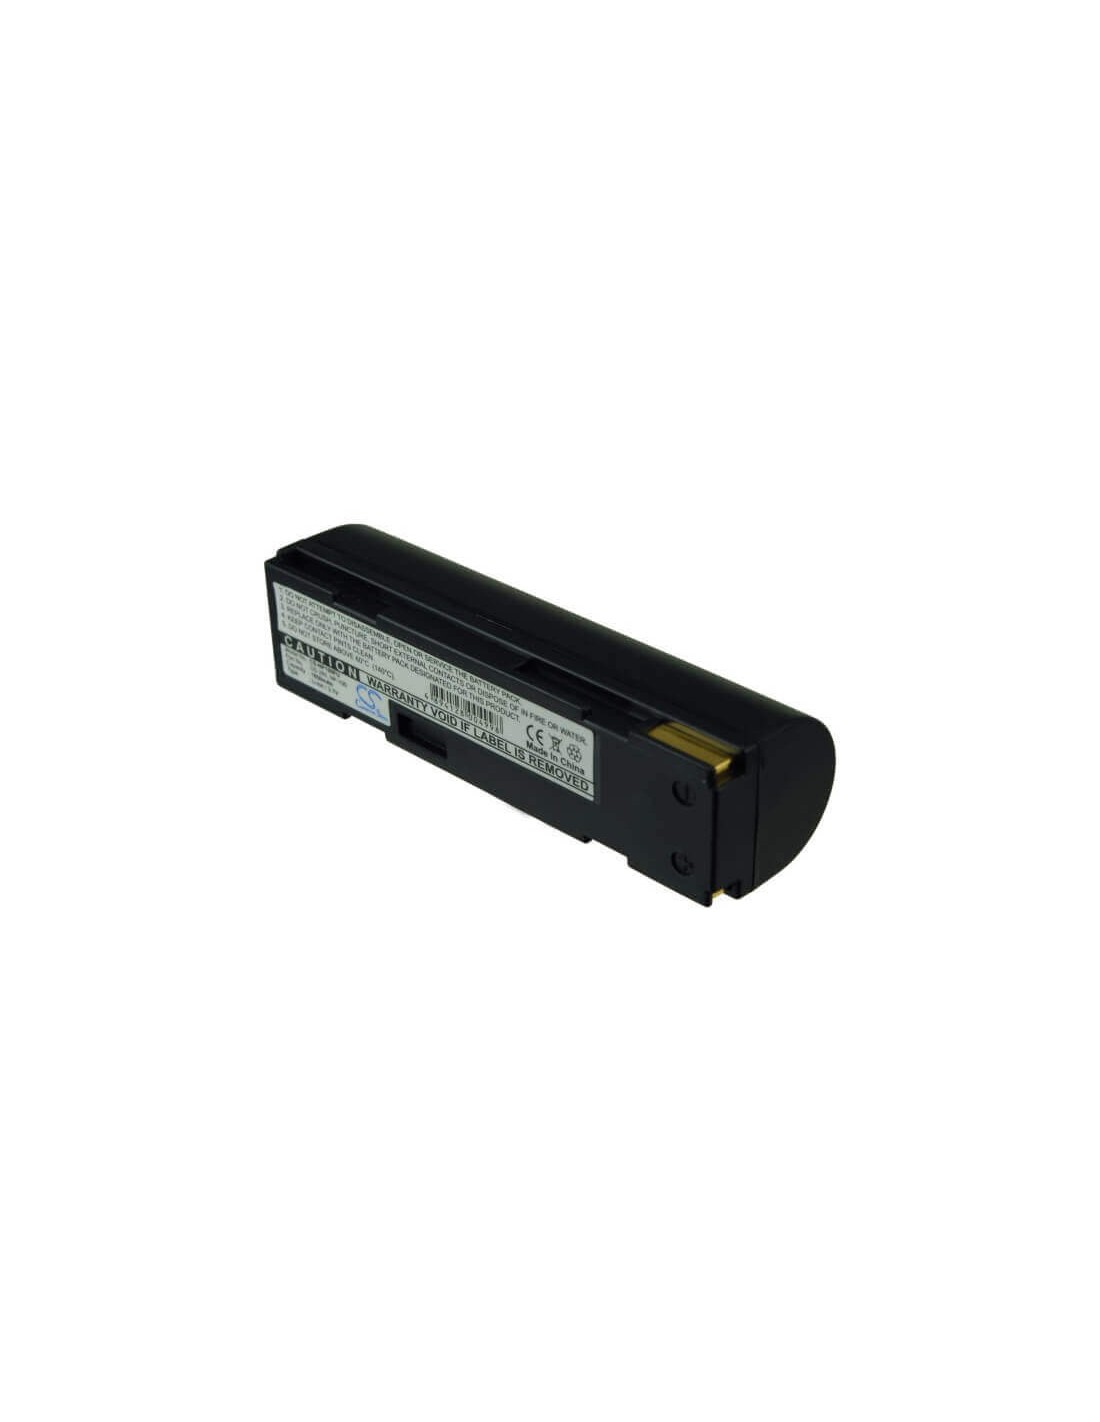 Battery for Toshiba Pdr-m3 3.7V, 1850mAh - 6.85Wh